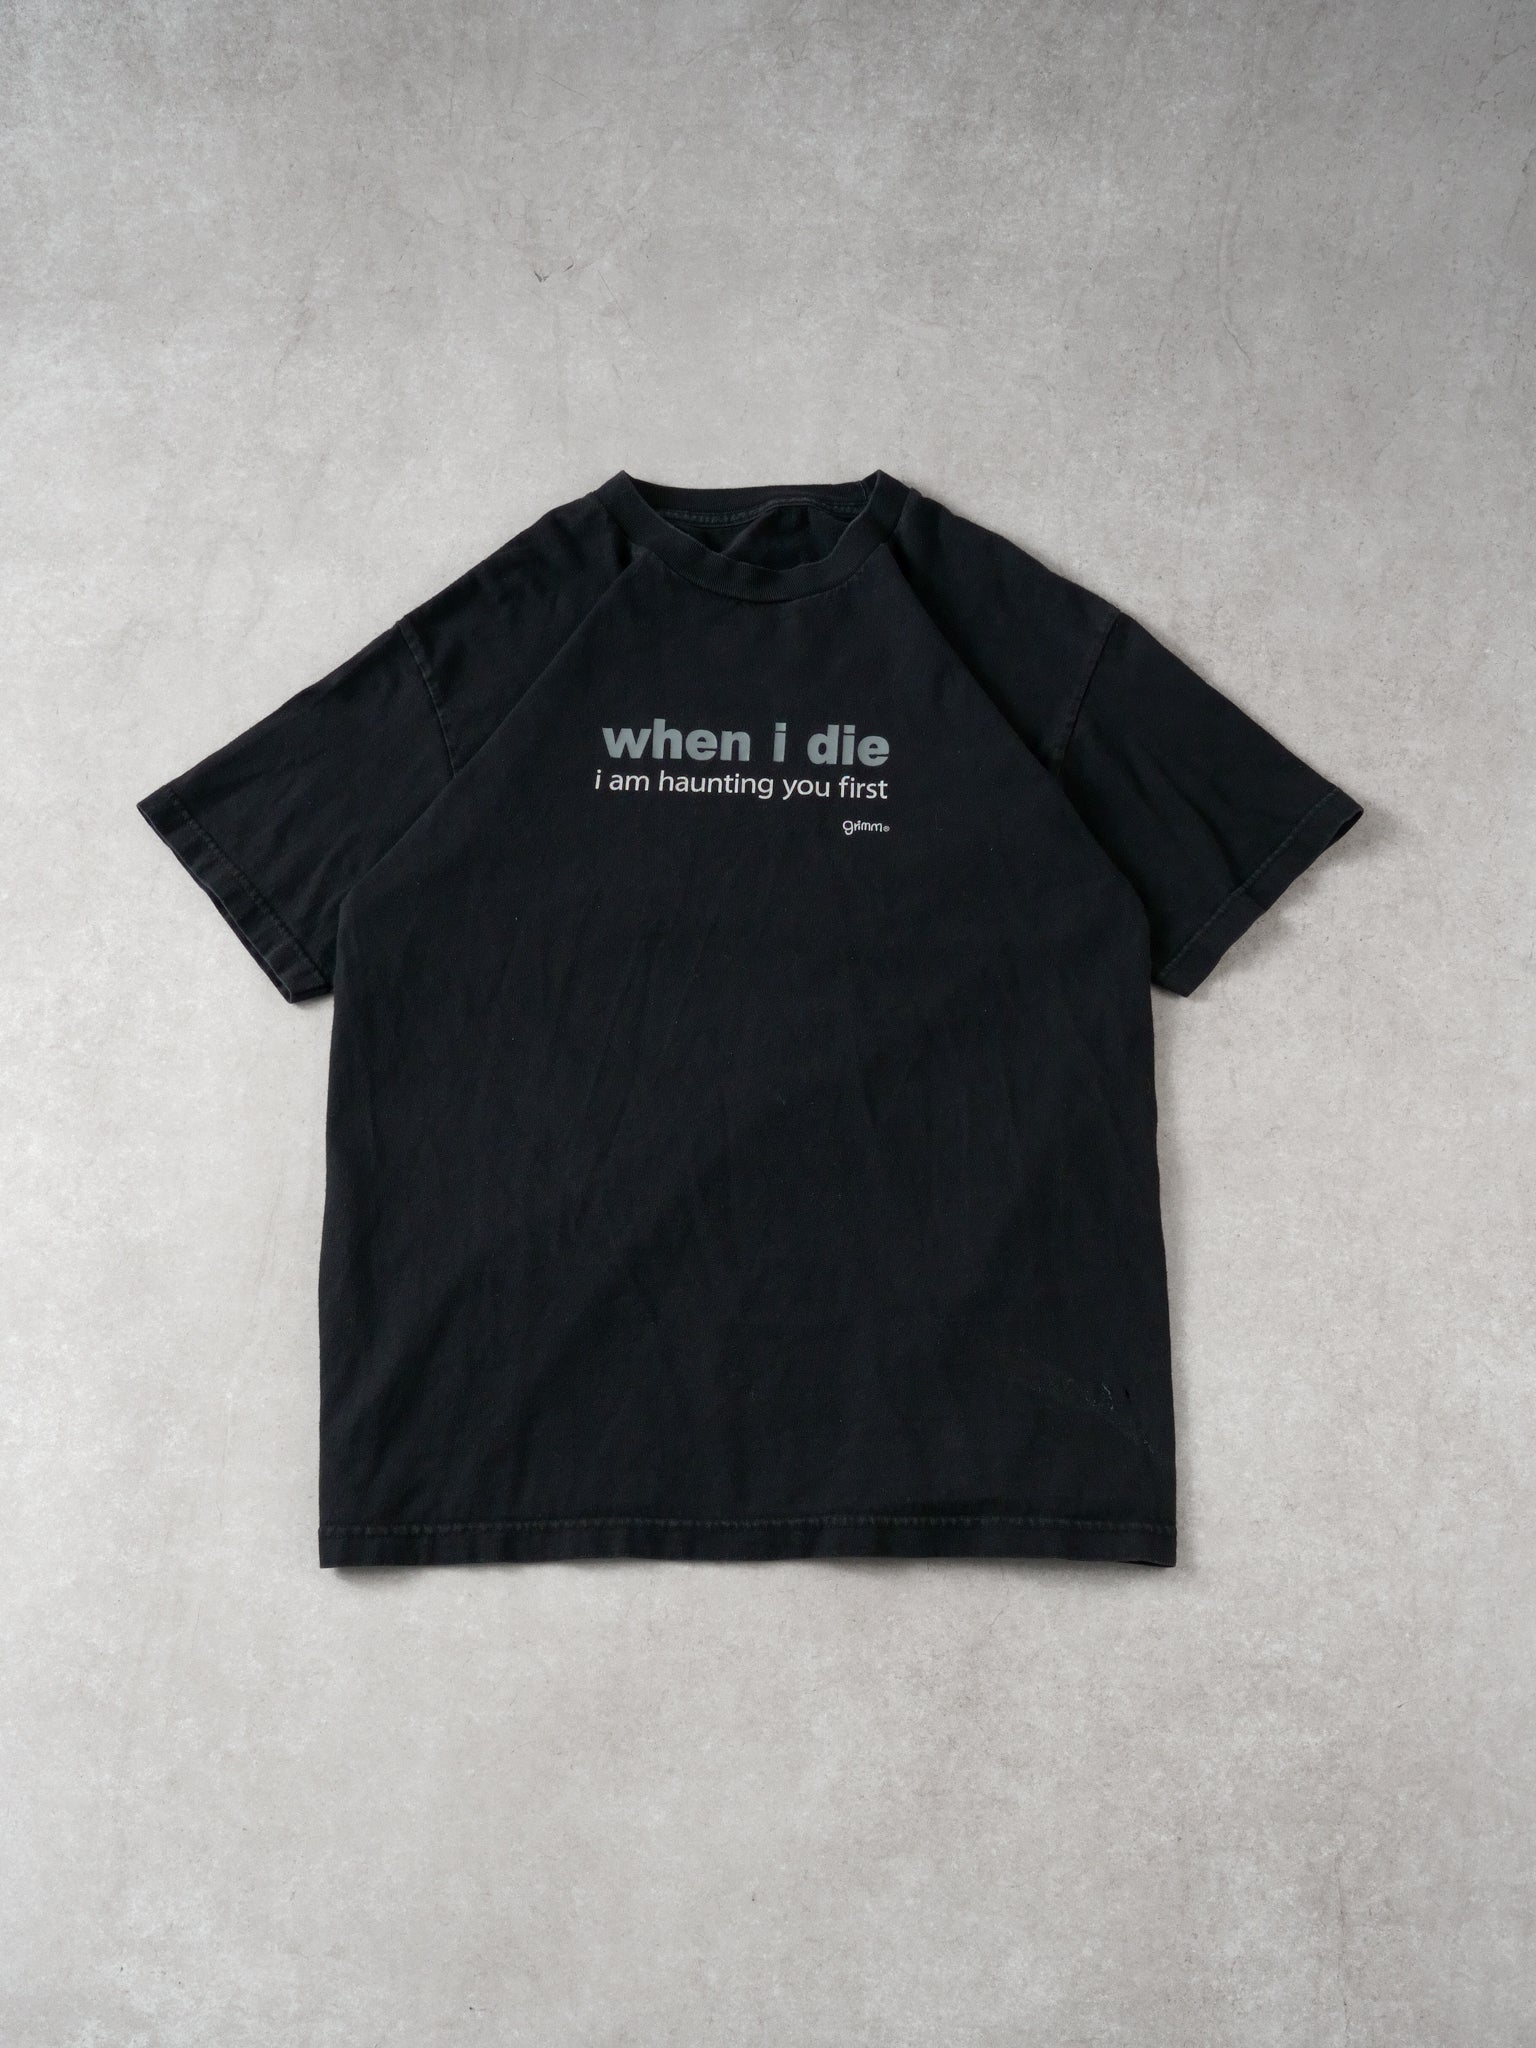 Vintage 90s Washed Black "When I Die I Am Haunting You First" Tee (M)